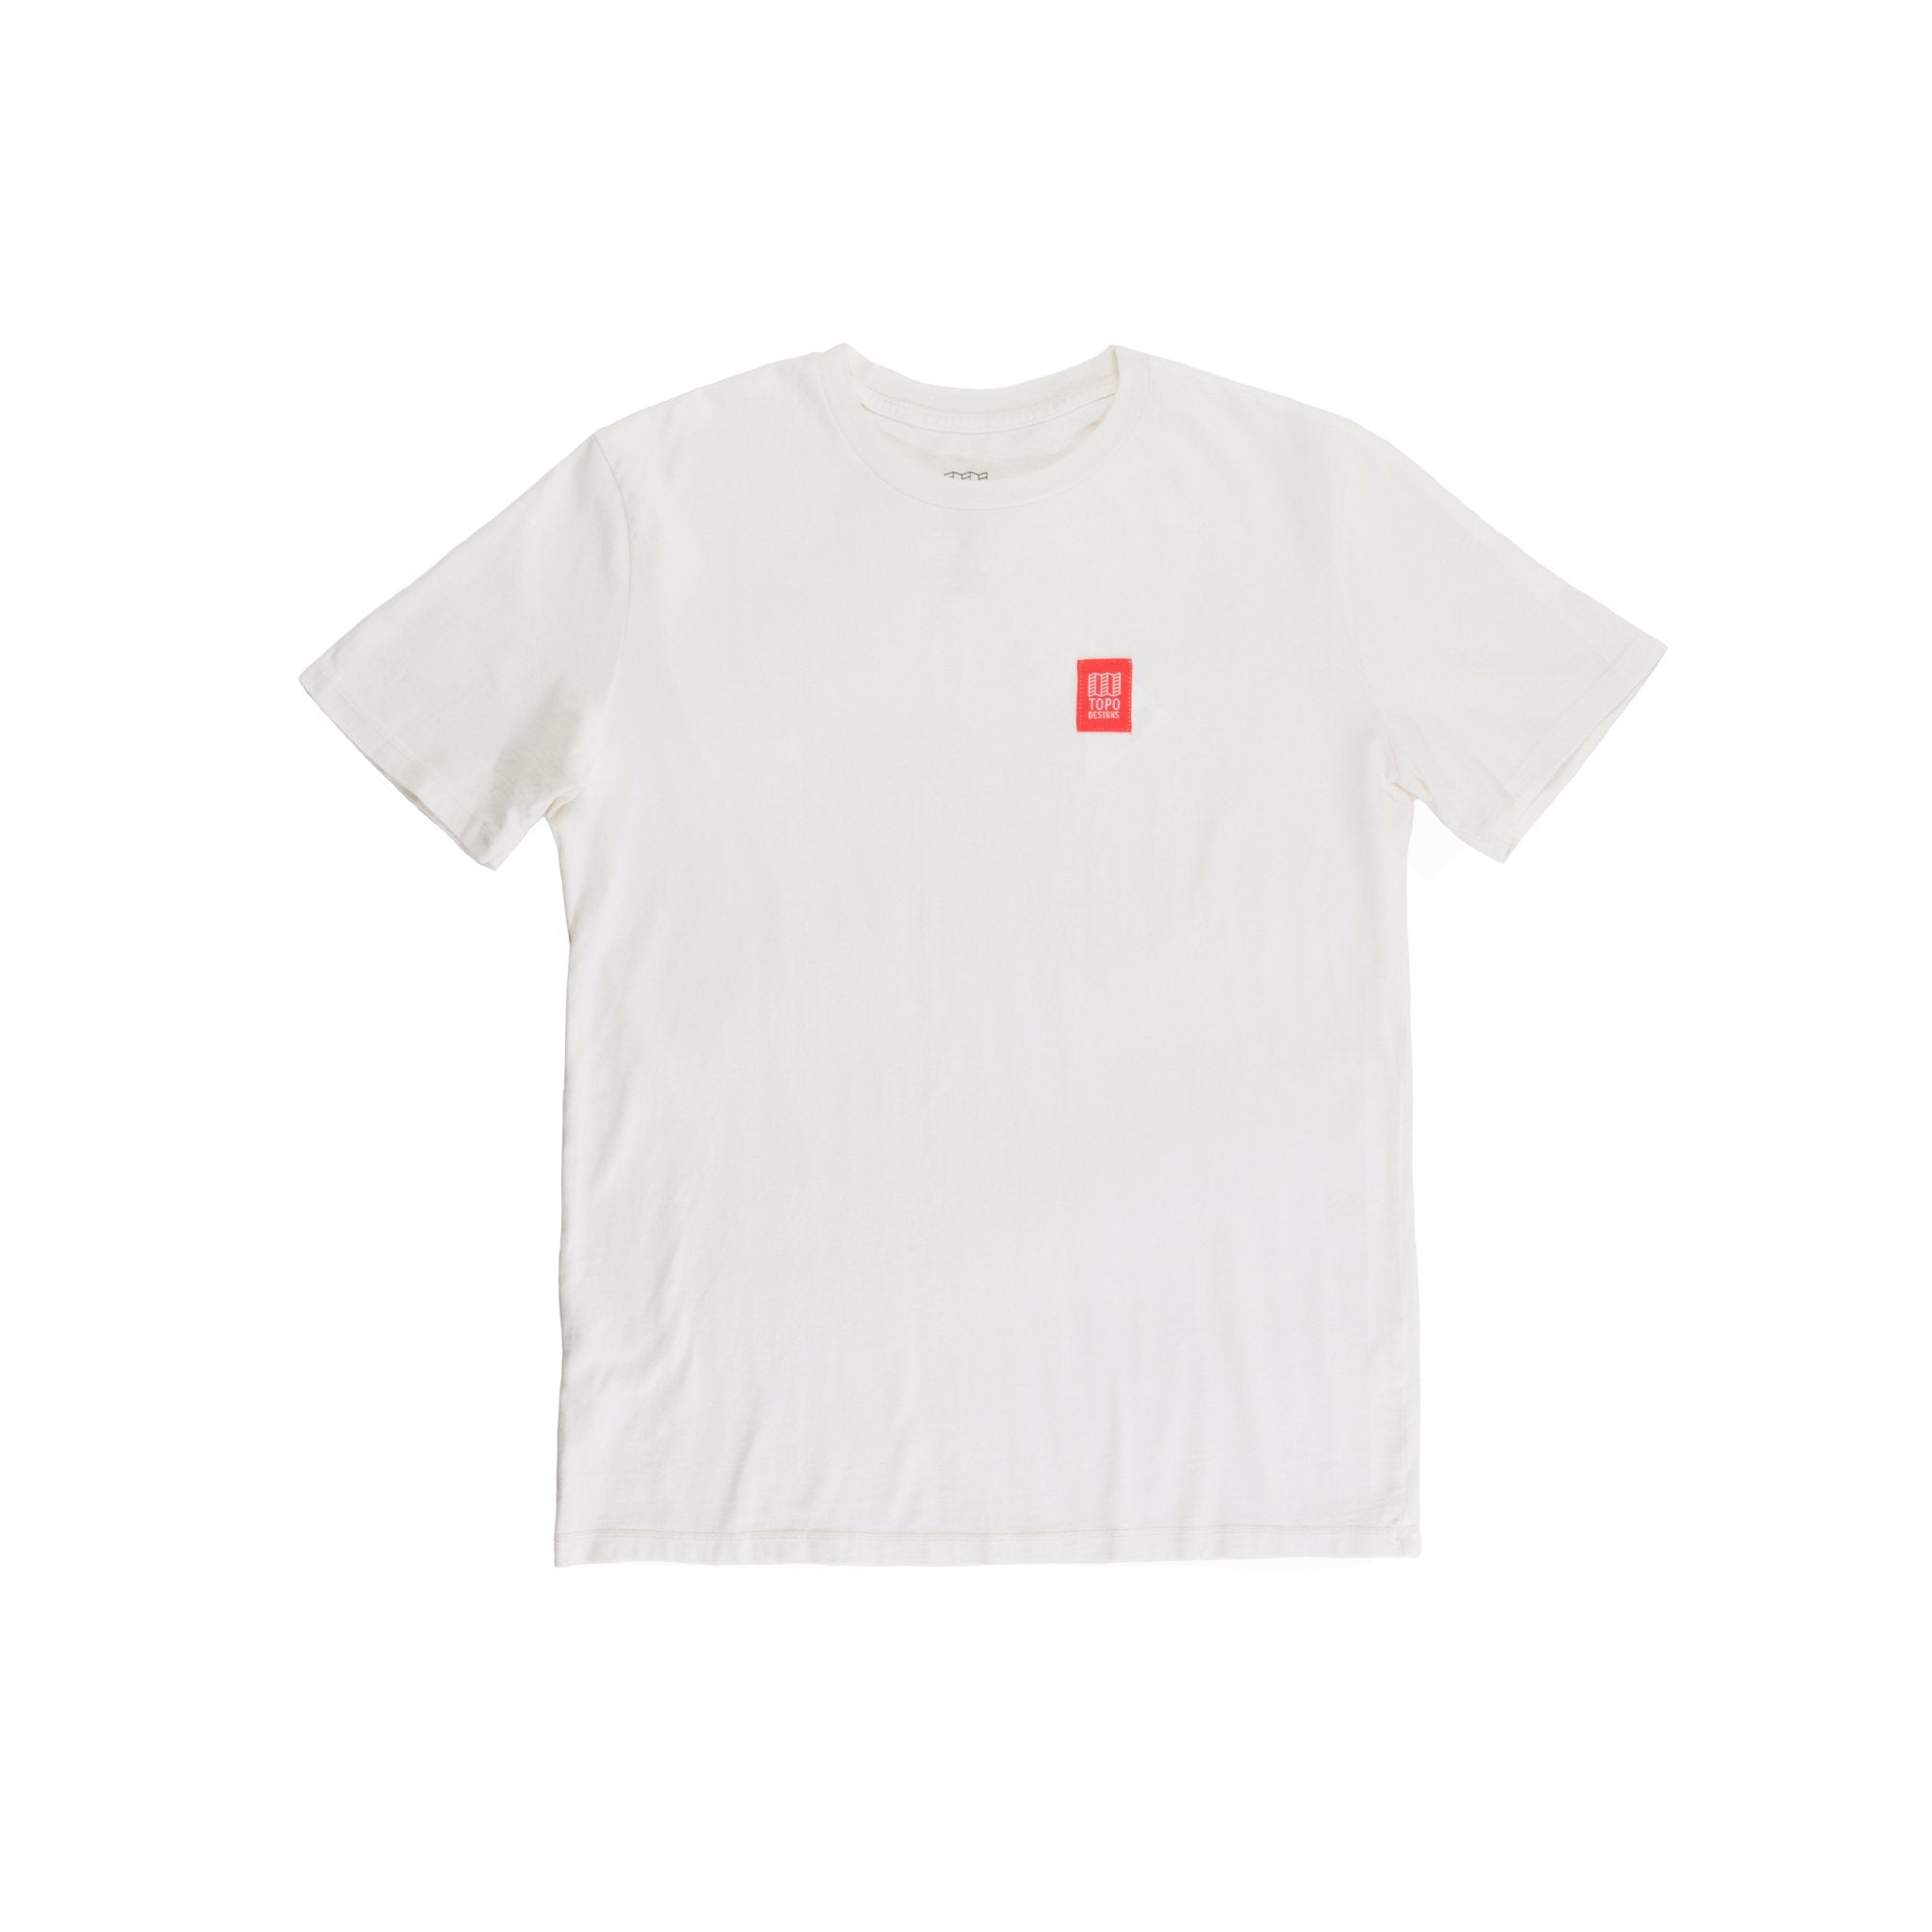 Front product shot of Topo Designs Men's Label short sleeve t-shirt in "Natural" white.